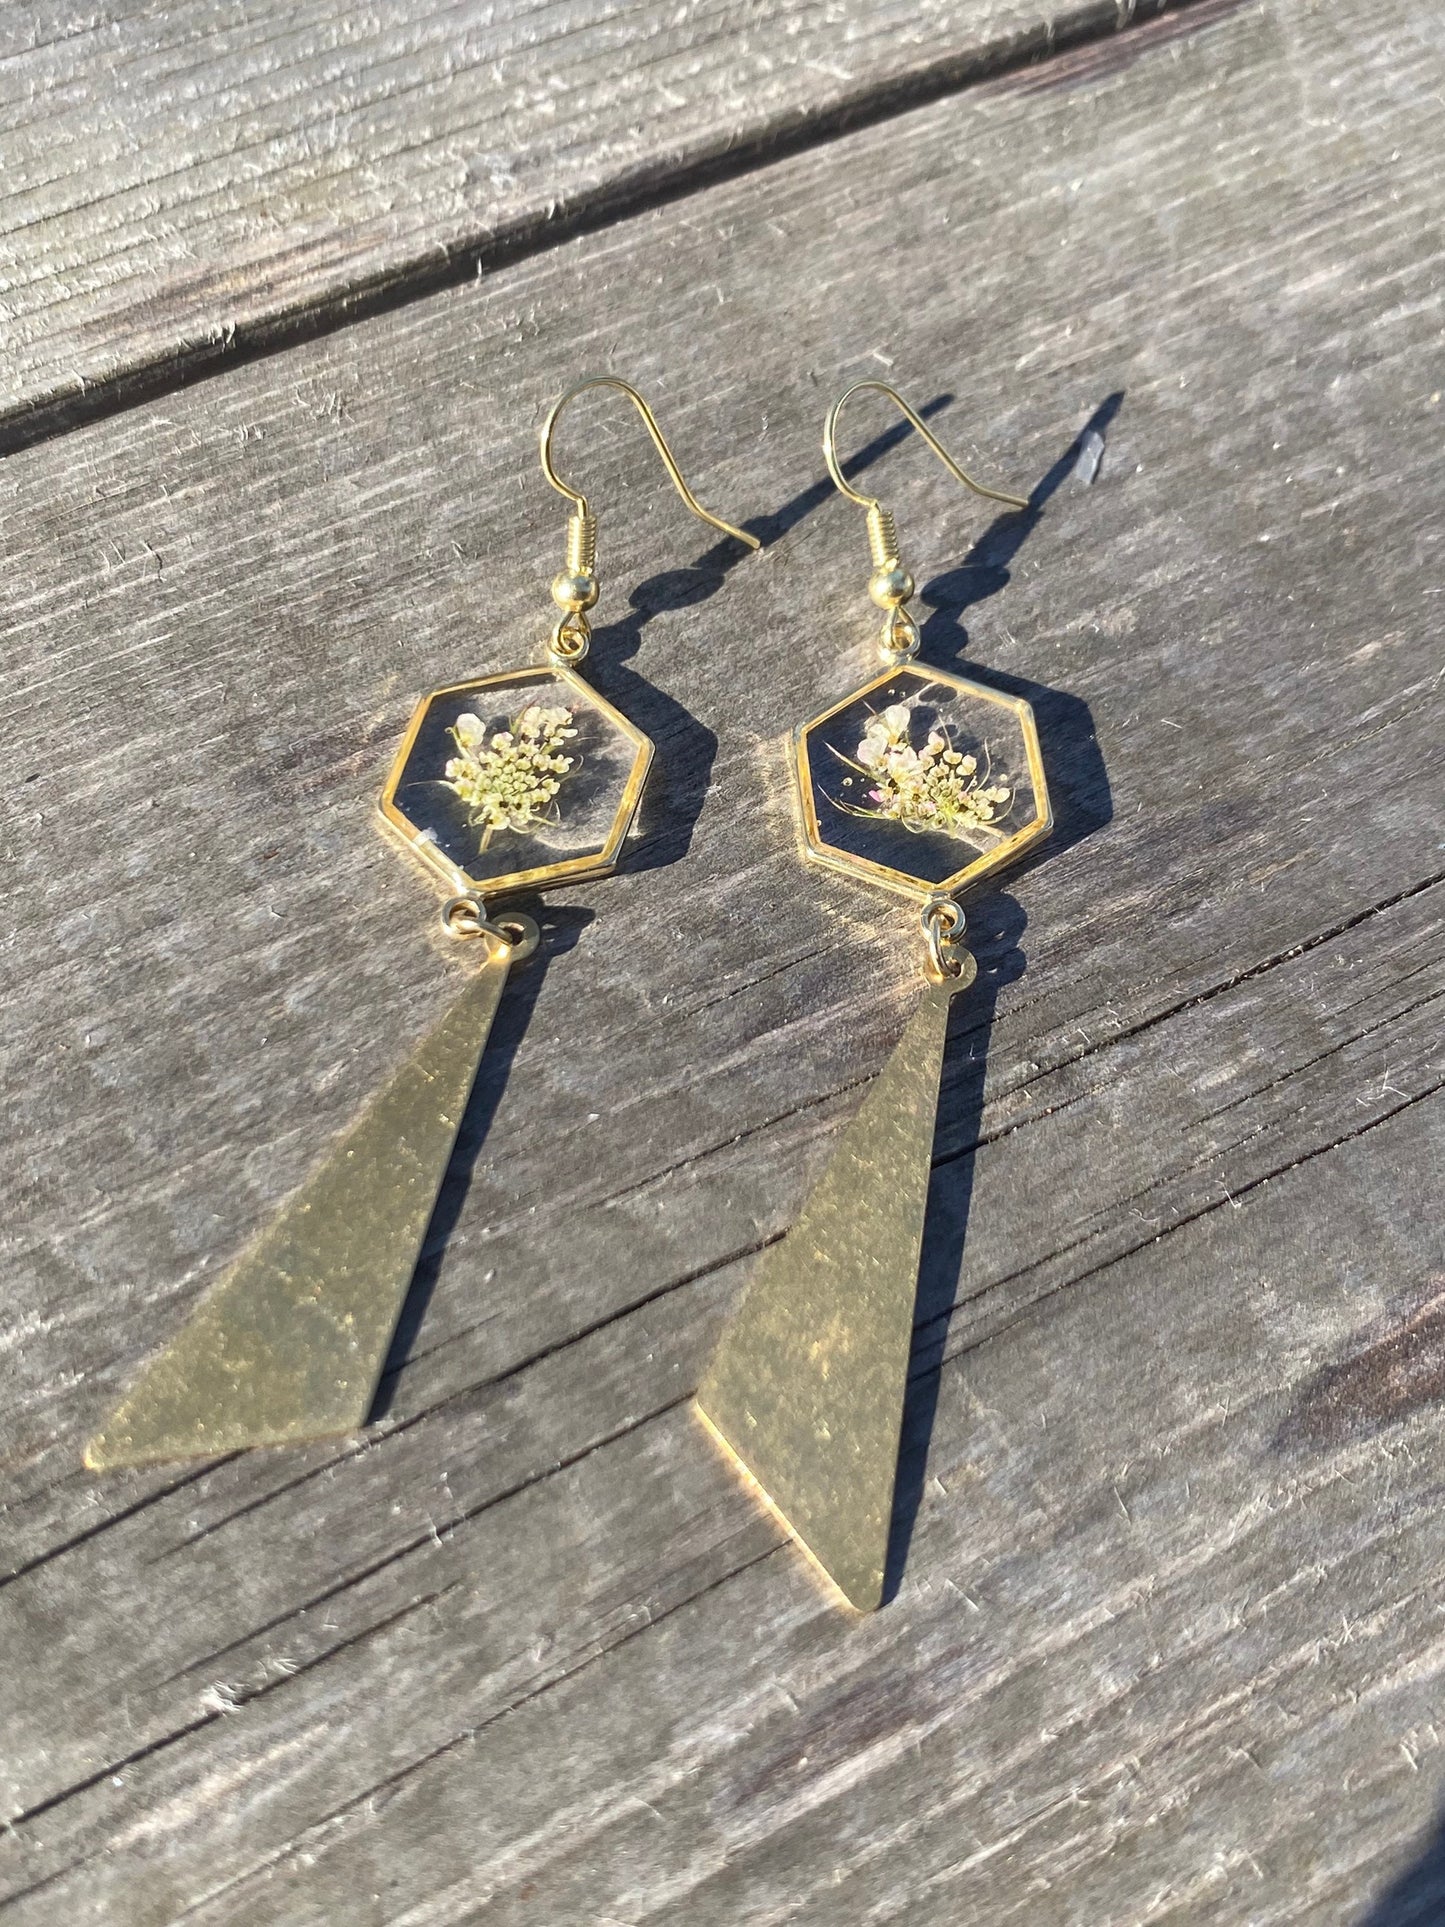 Honeycomb Queen Anne's Lace Earrings